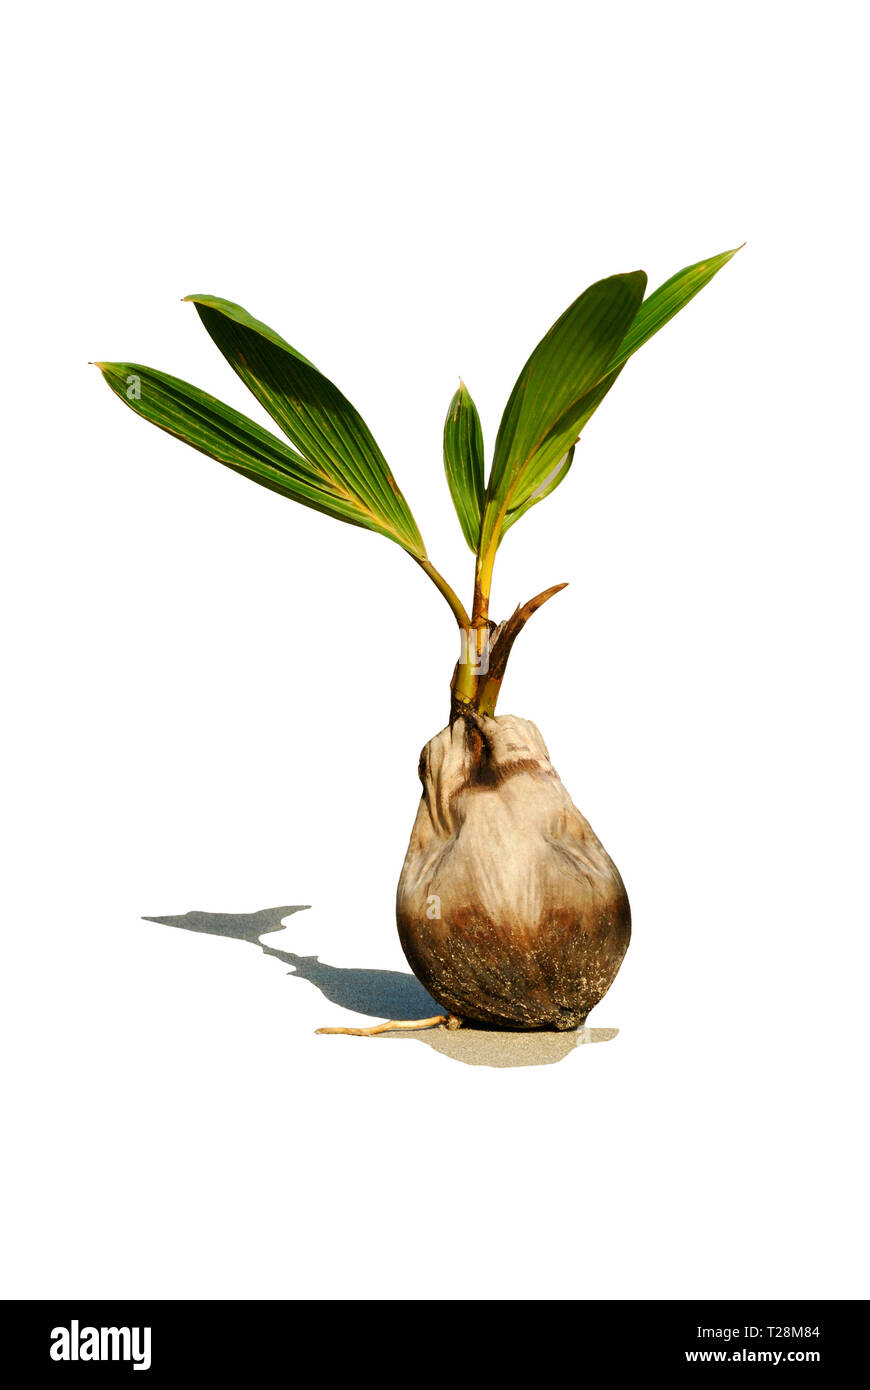 Cut-out of a Coconut (Cocos nucifera) germinating on a beach Stock Photo